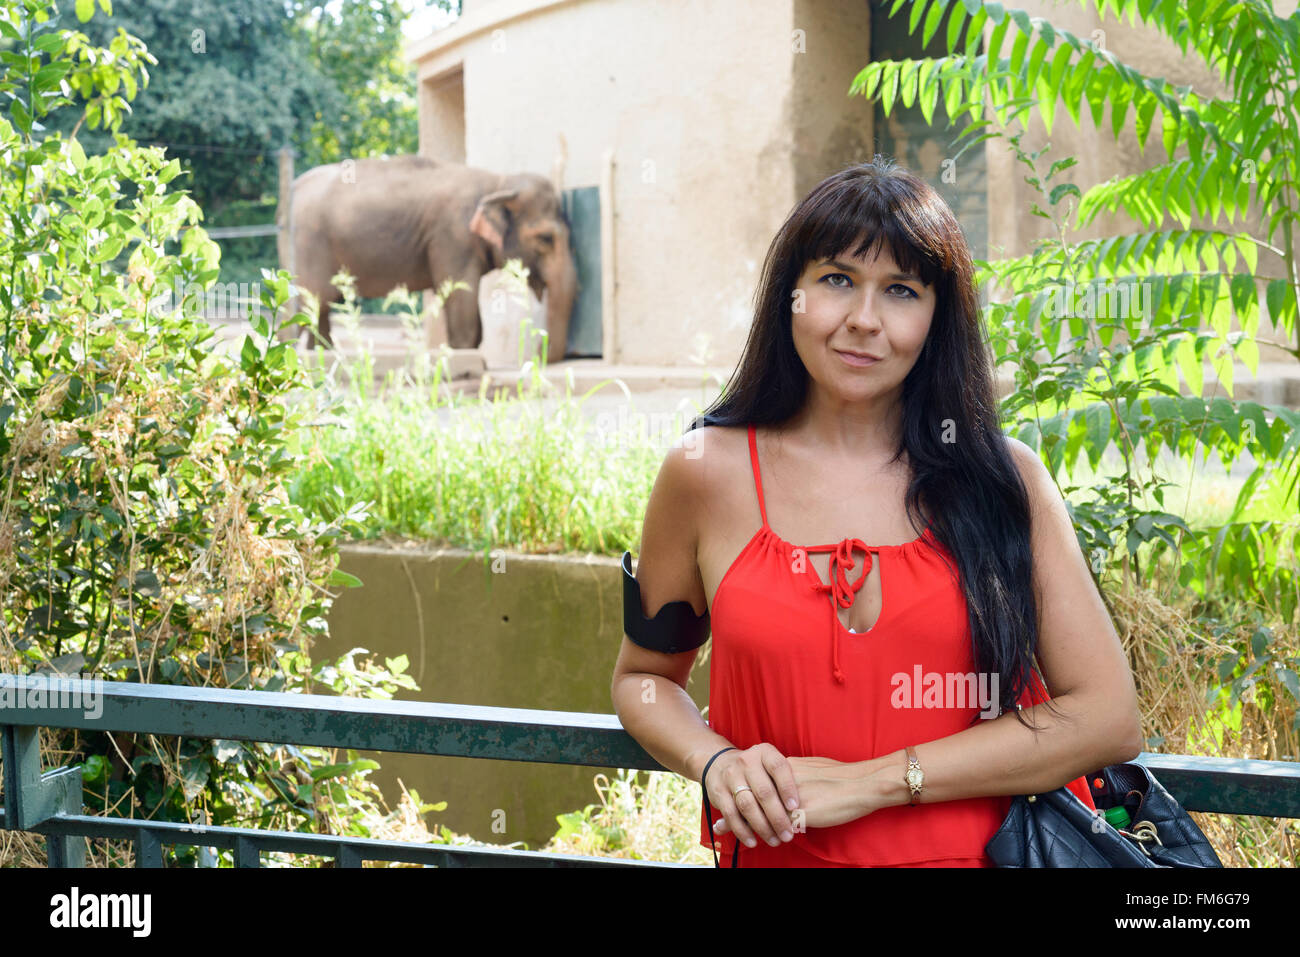 girl smiling between green plants, an elephant in background Stock Photo